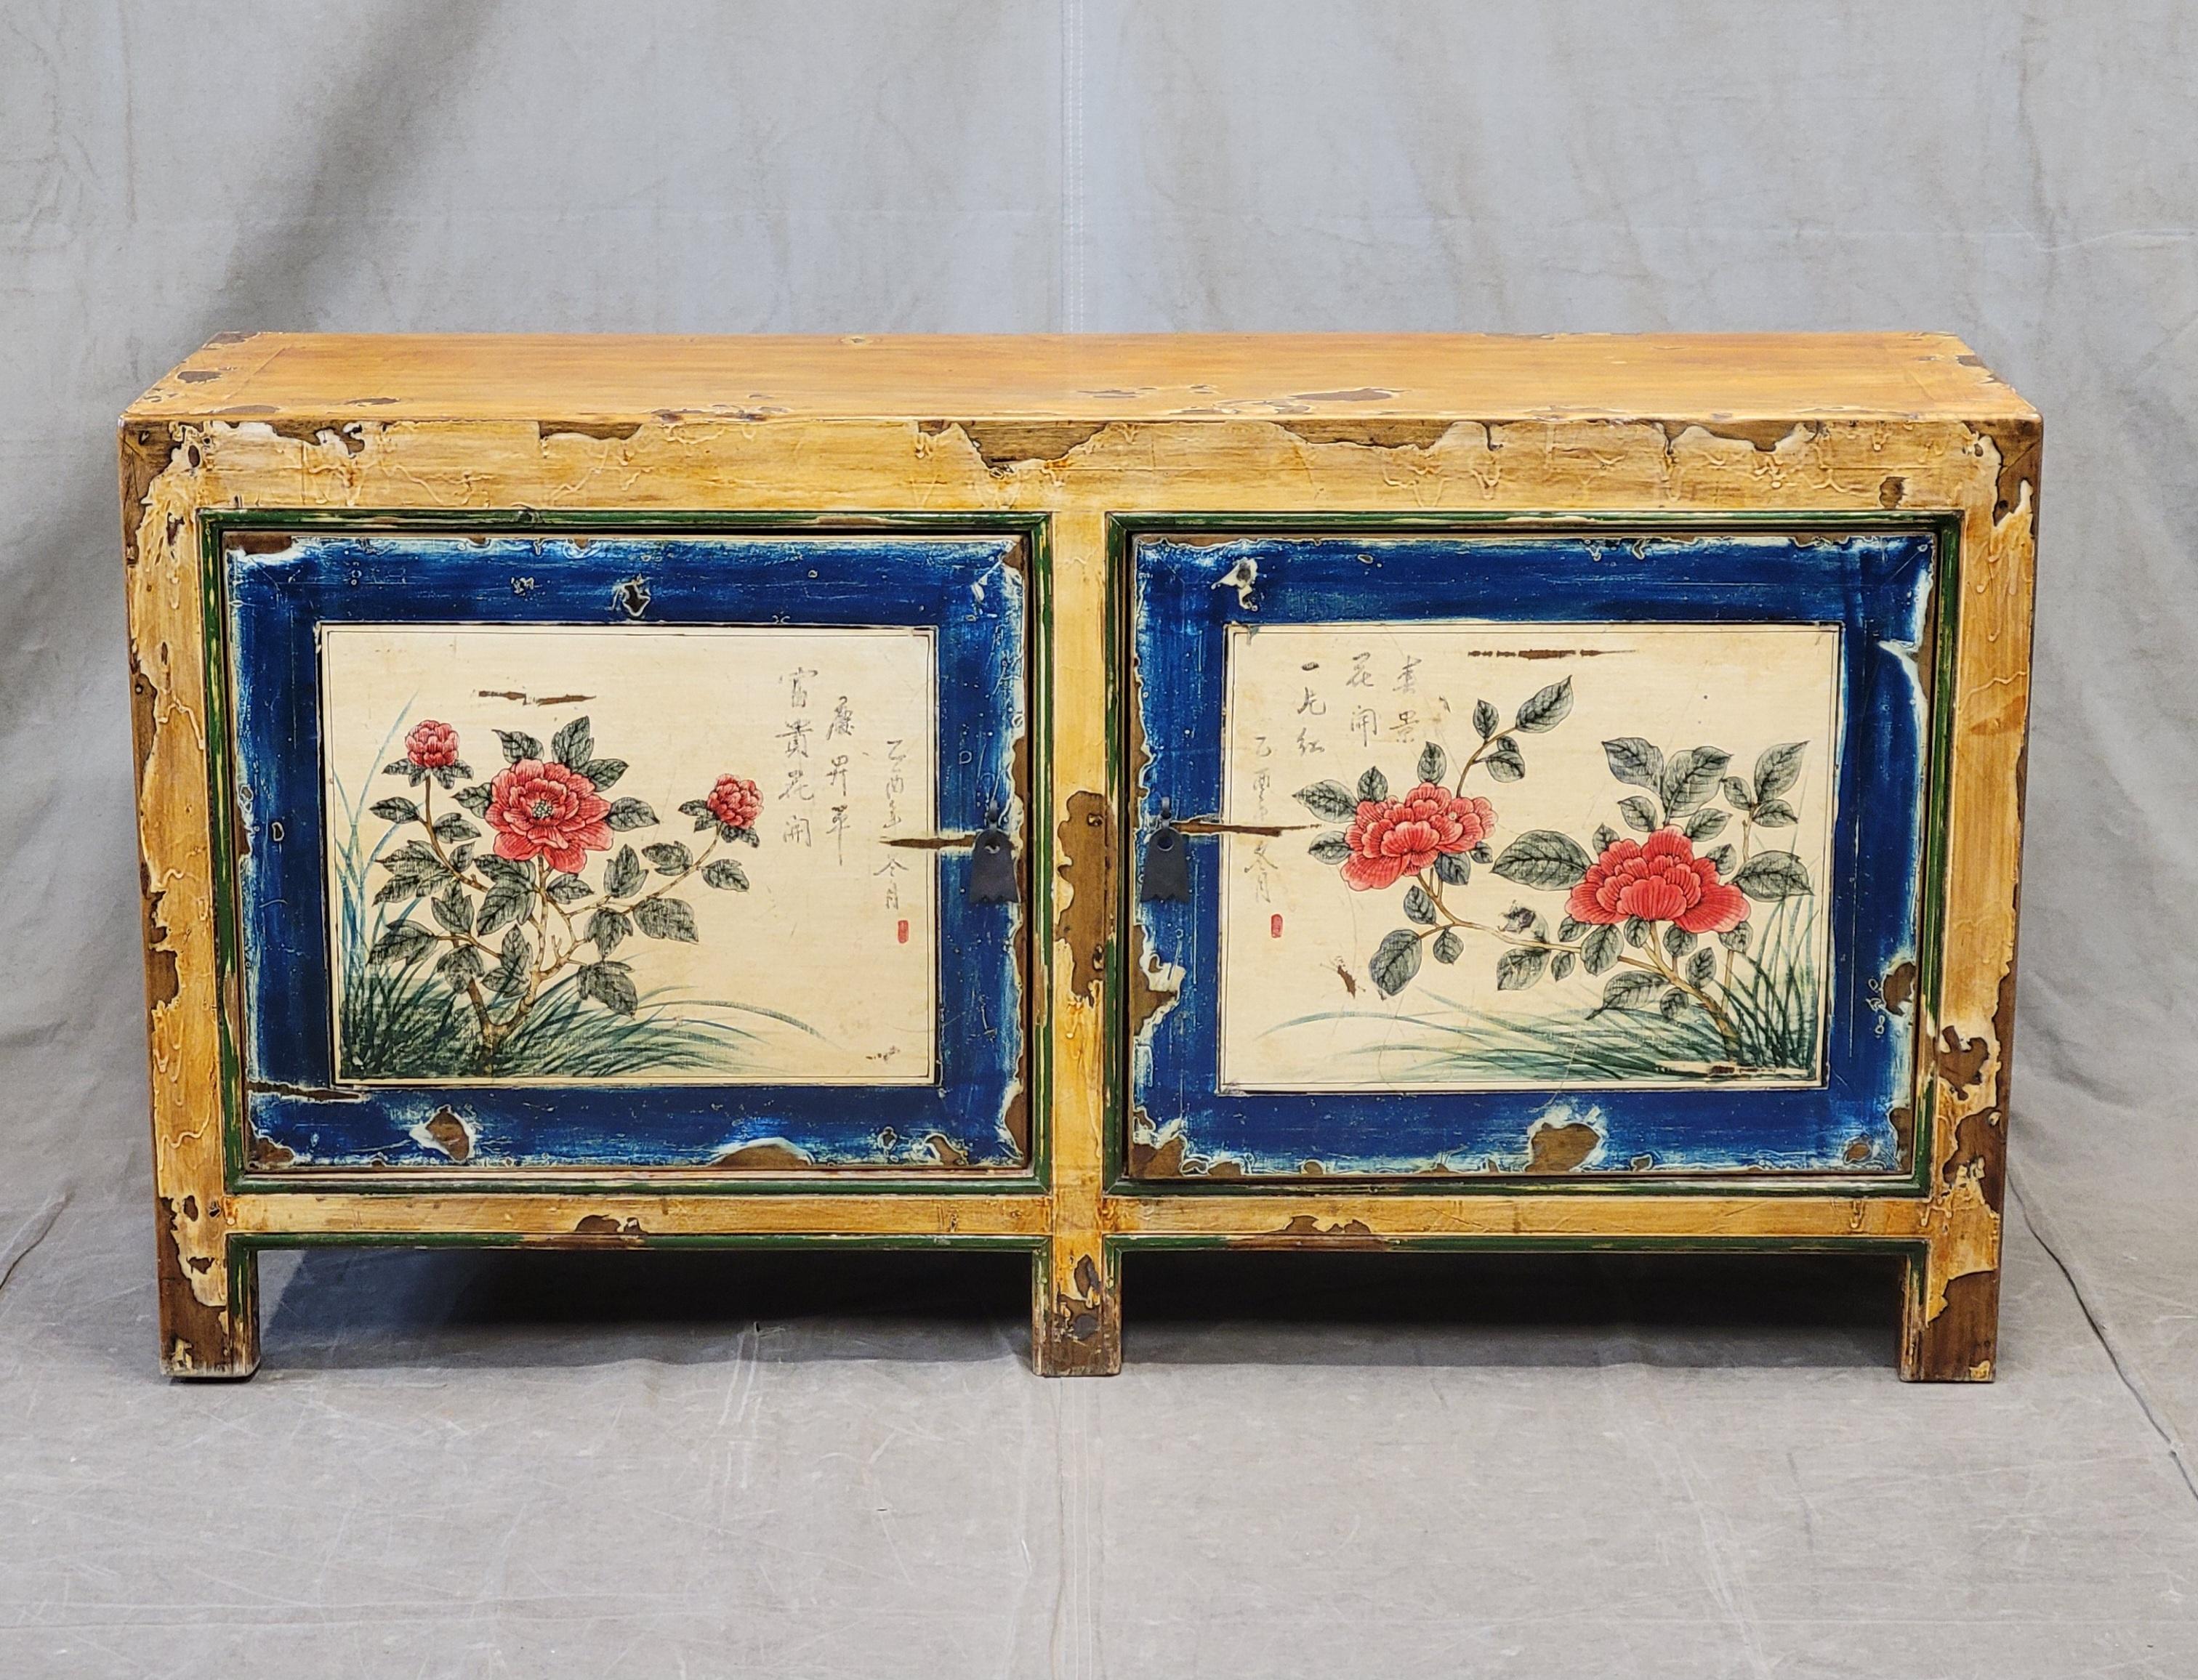 A charming vintage Chinese lacquer console cabinet in gorgeous shades of ochre, blue, white, red and green. The painted floral door panels are accented with Chinese writing. Note the distressing in the lacquer finish, see photos, that add a rustic